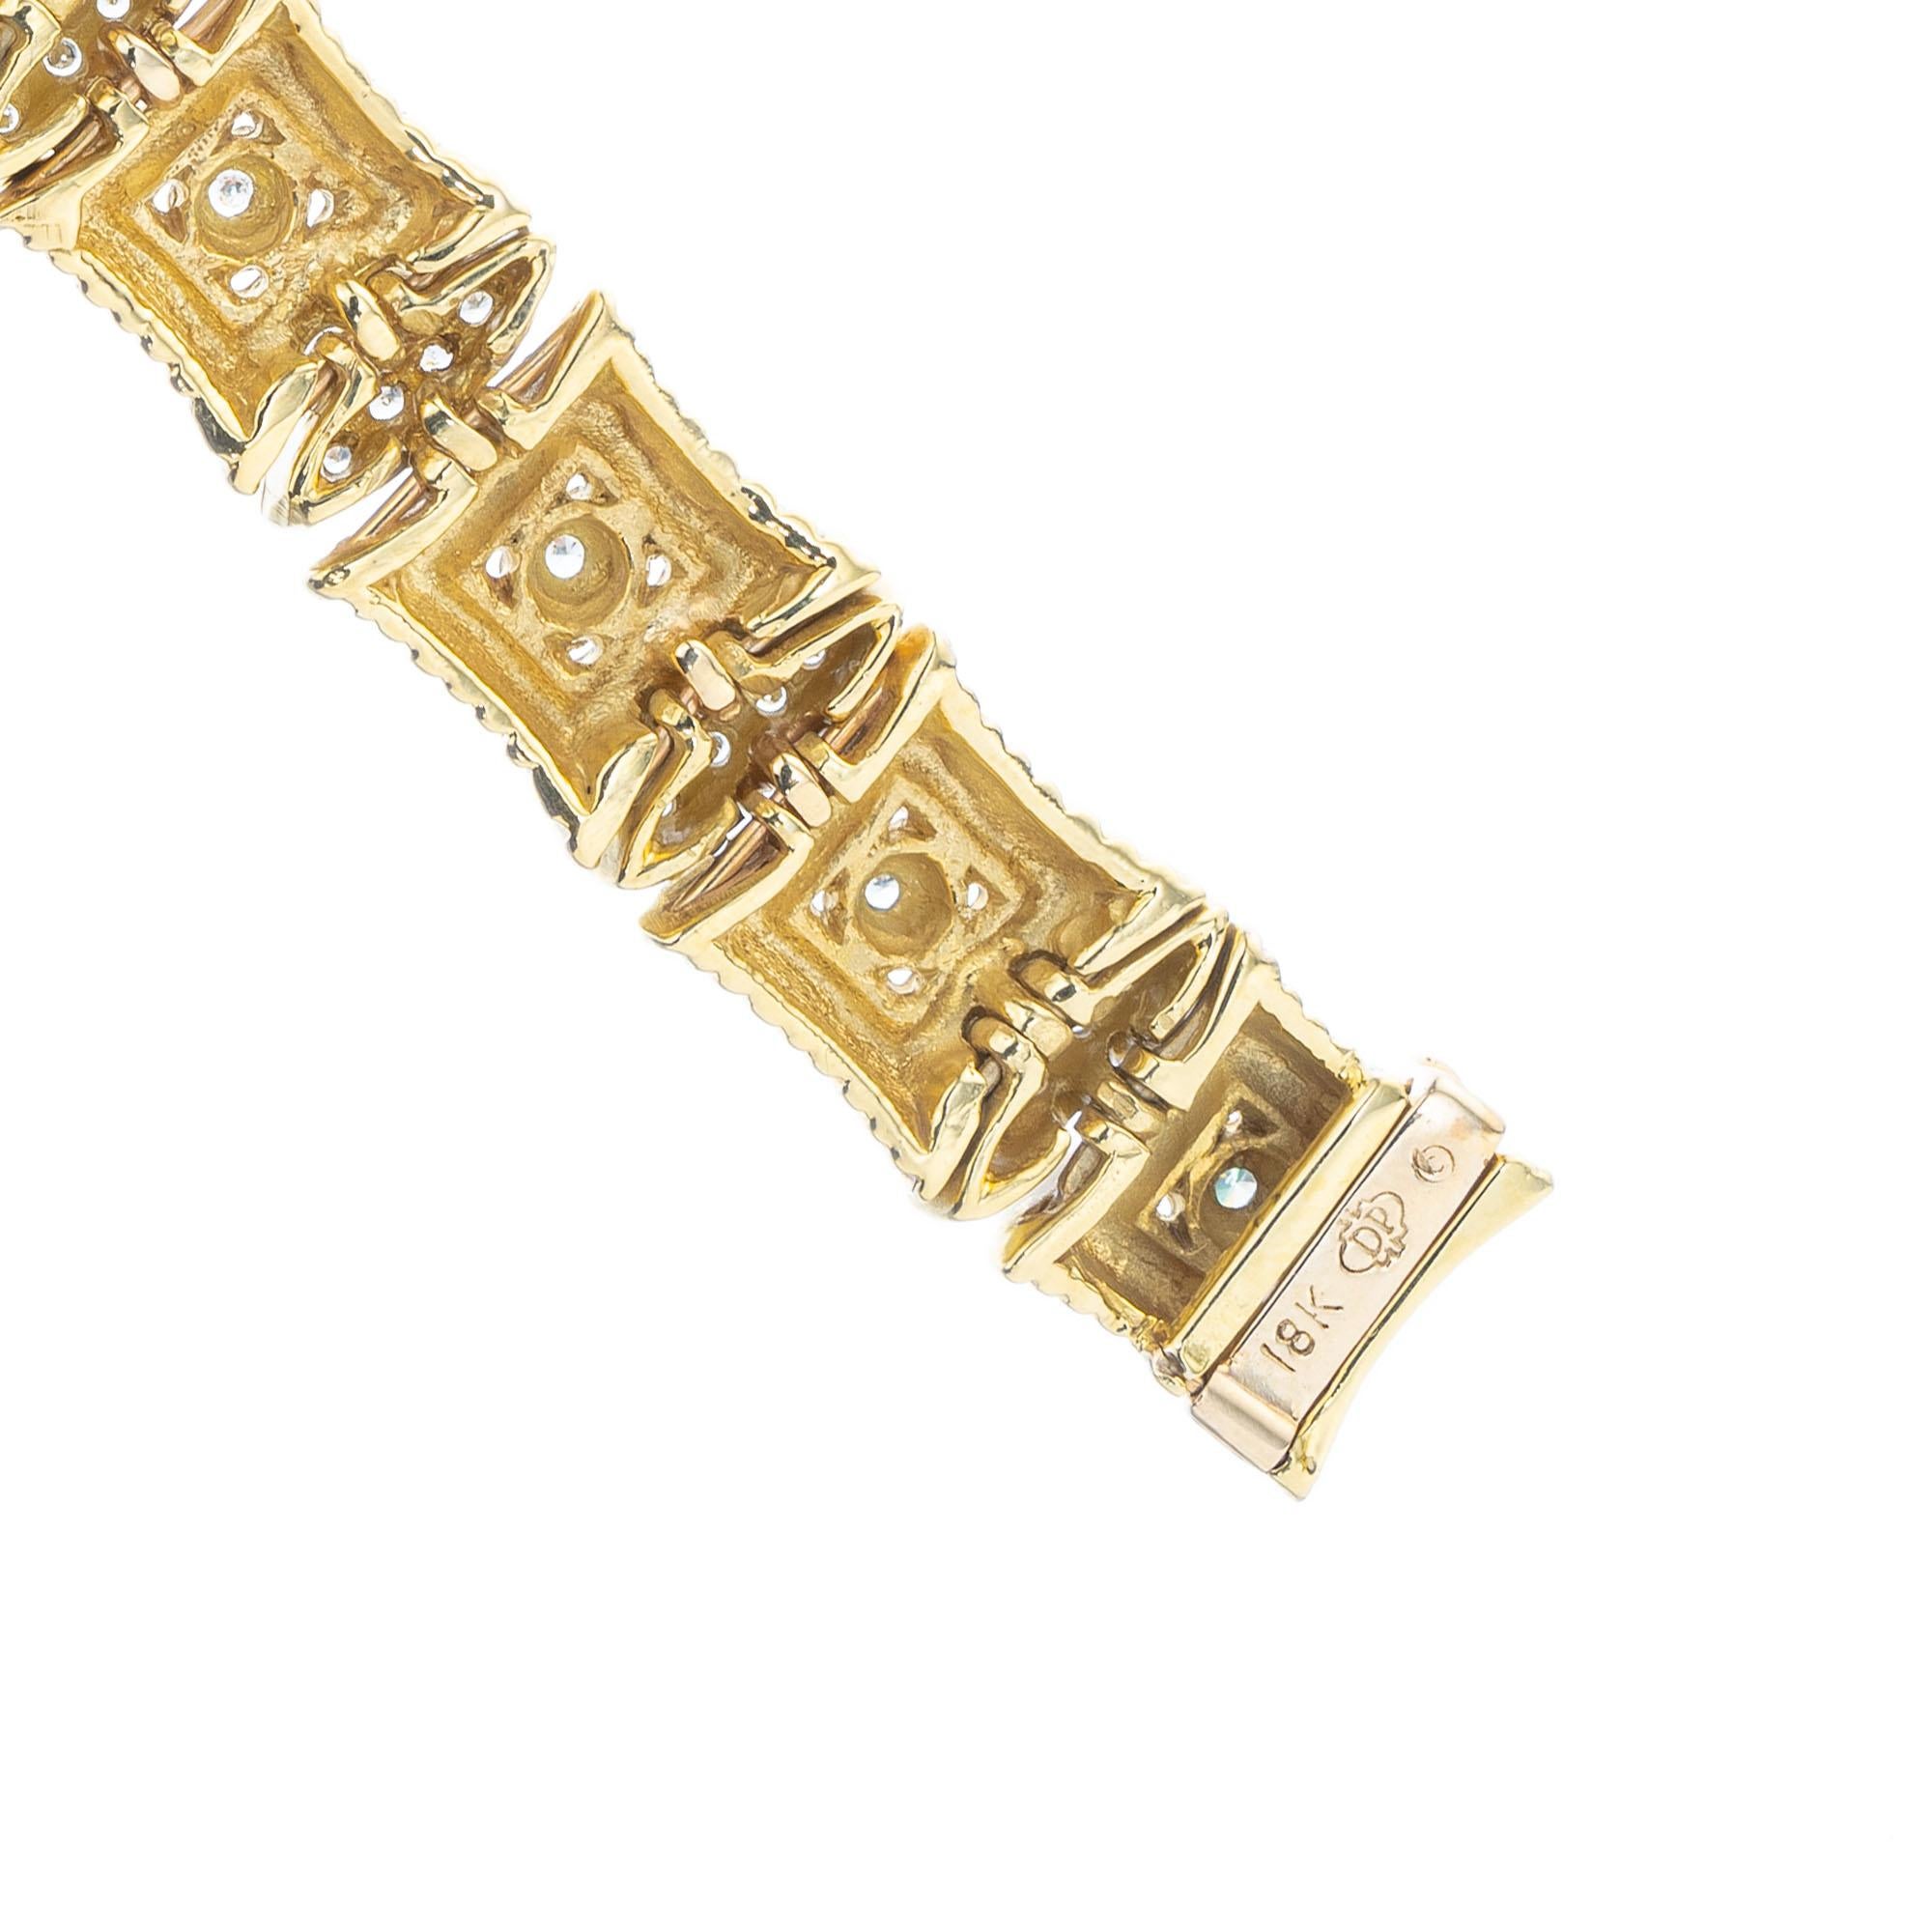 Doris Panos 1.00 Carat Diamond Yellow Gold Link Bracelet In Good Condition For Sale In Stamford, CT